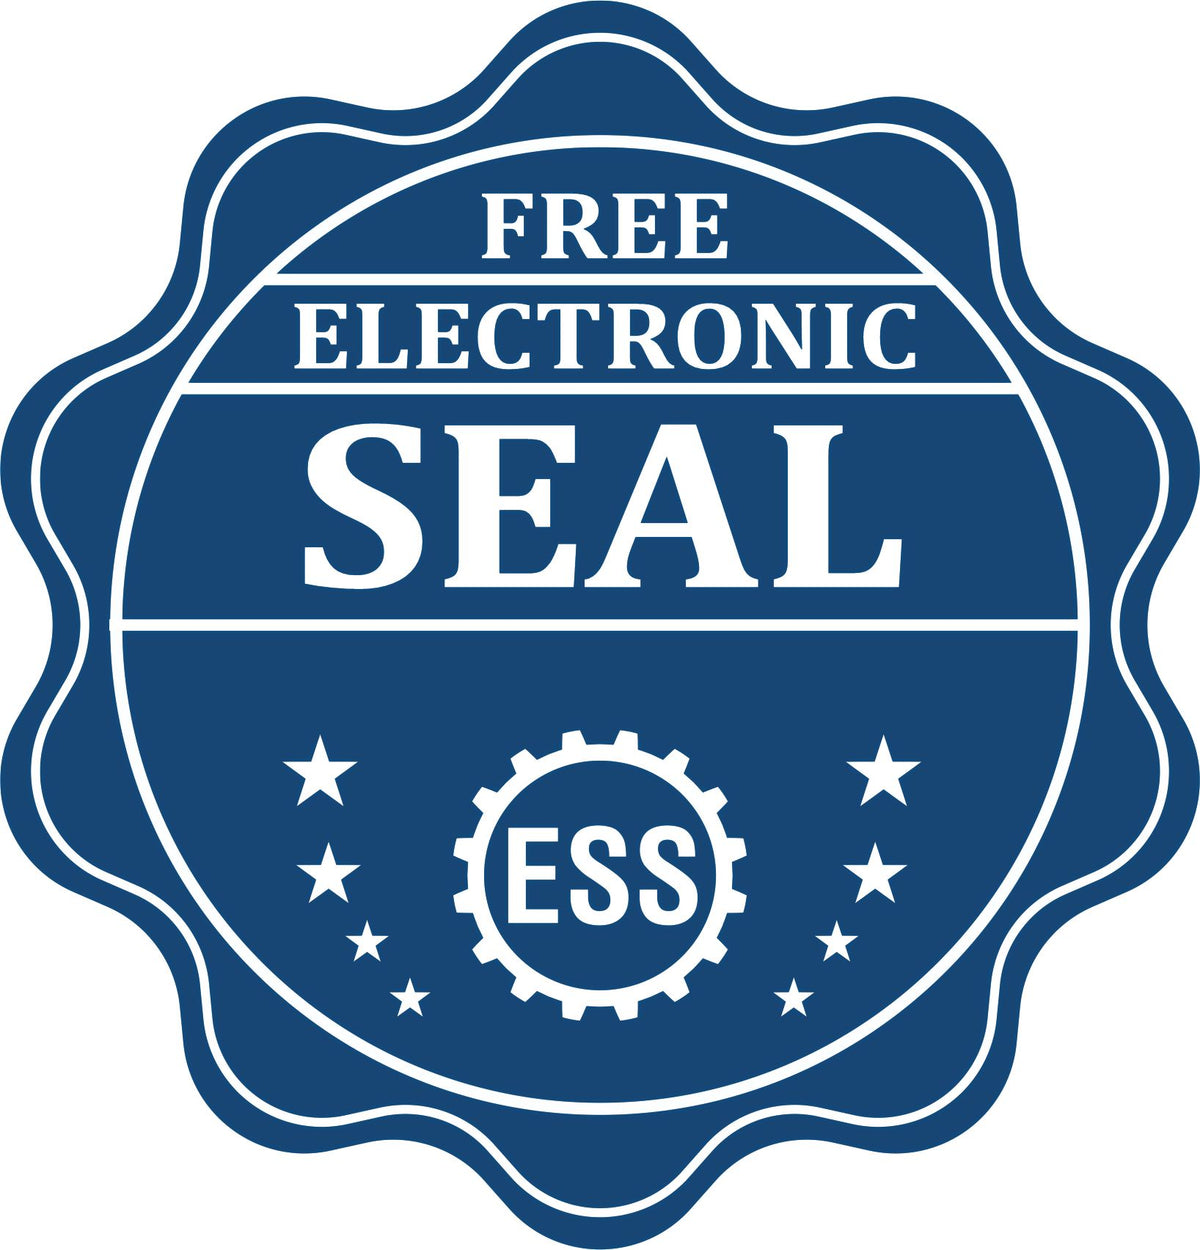 A badge showing a free electronic seal for the Premium MaxLight Pre-Inked Connecticut Engineering Stamp with stars and the ESS gear on the emblem.